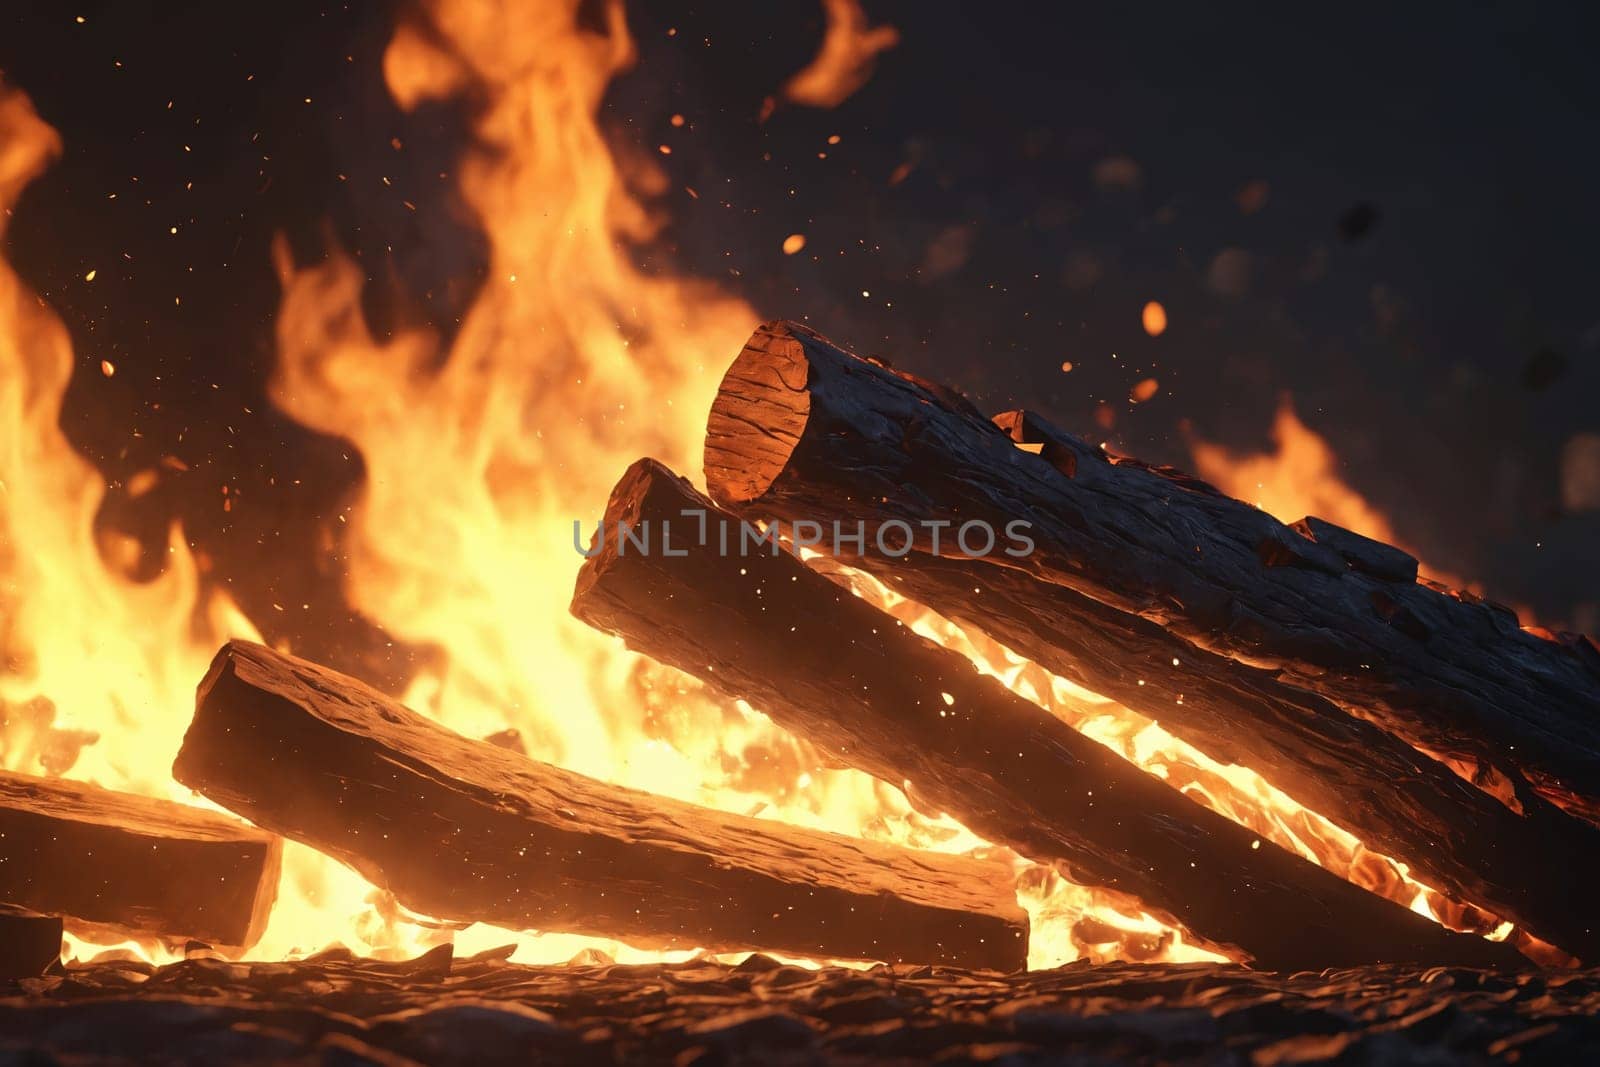 The night comes alive with the crackle of burning wood and the dance of sparks in this realistic 3D fire depiction.